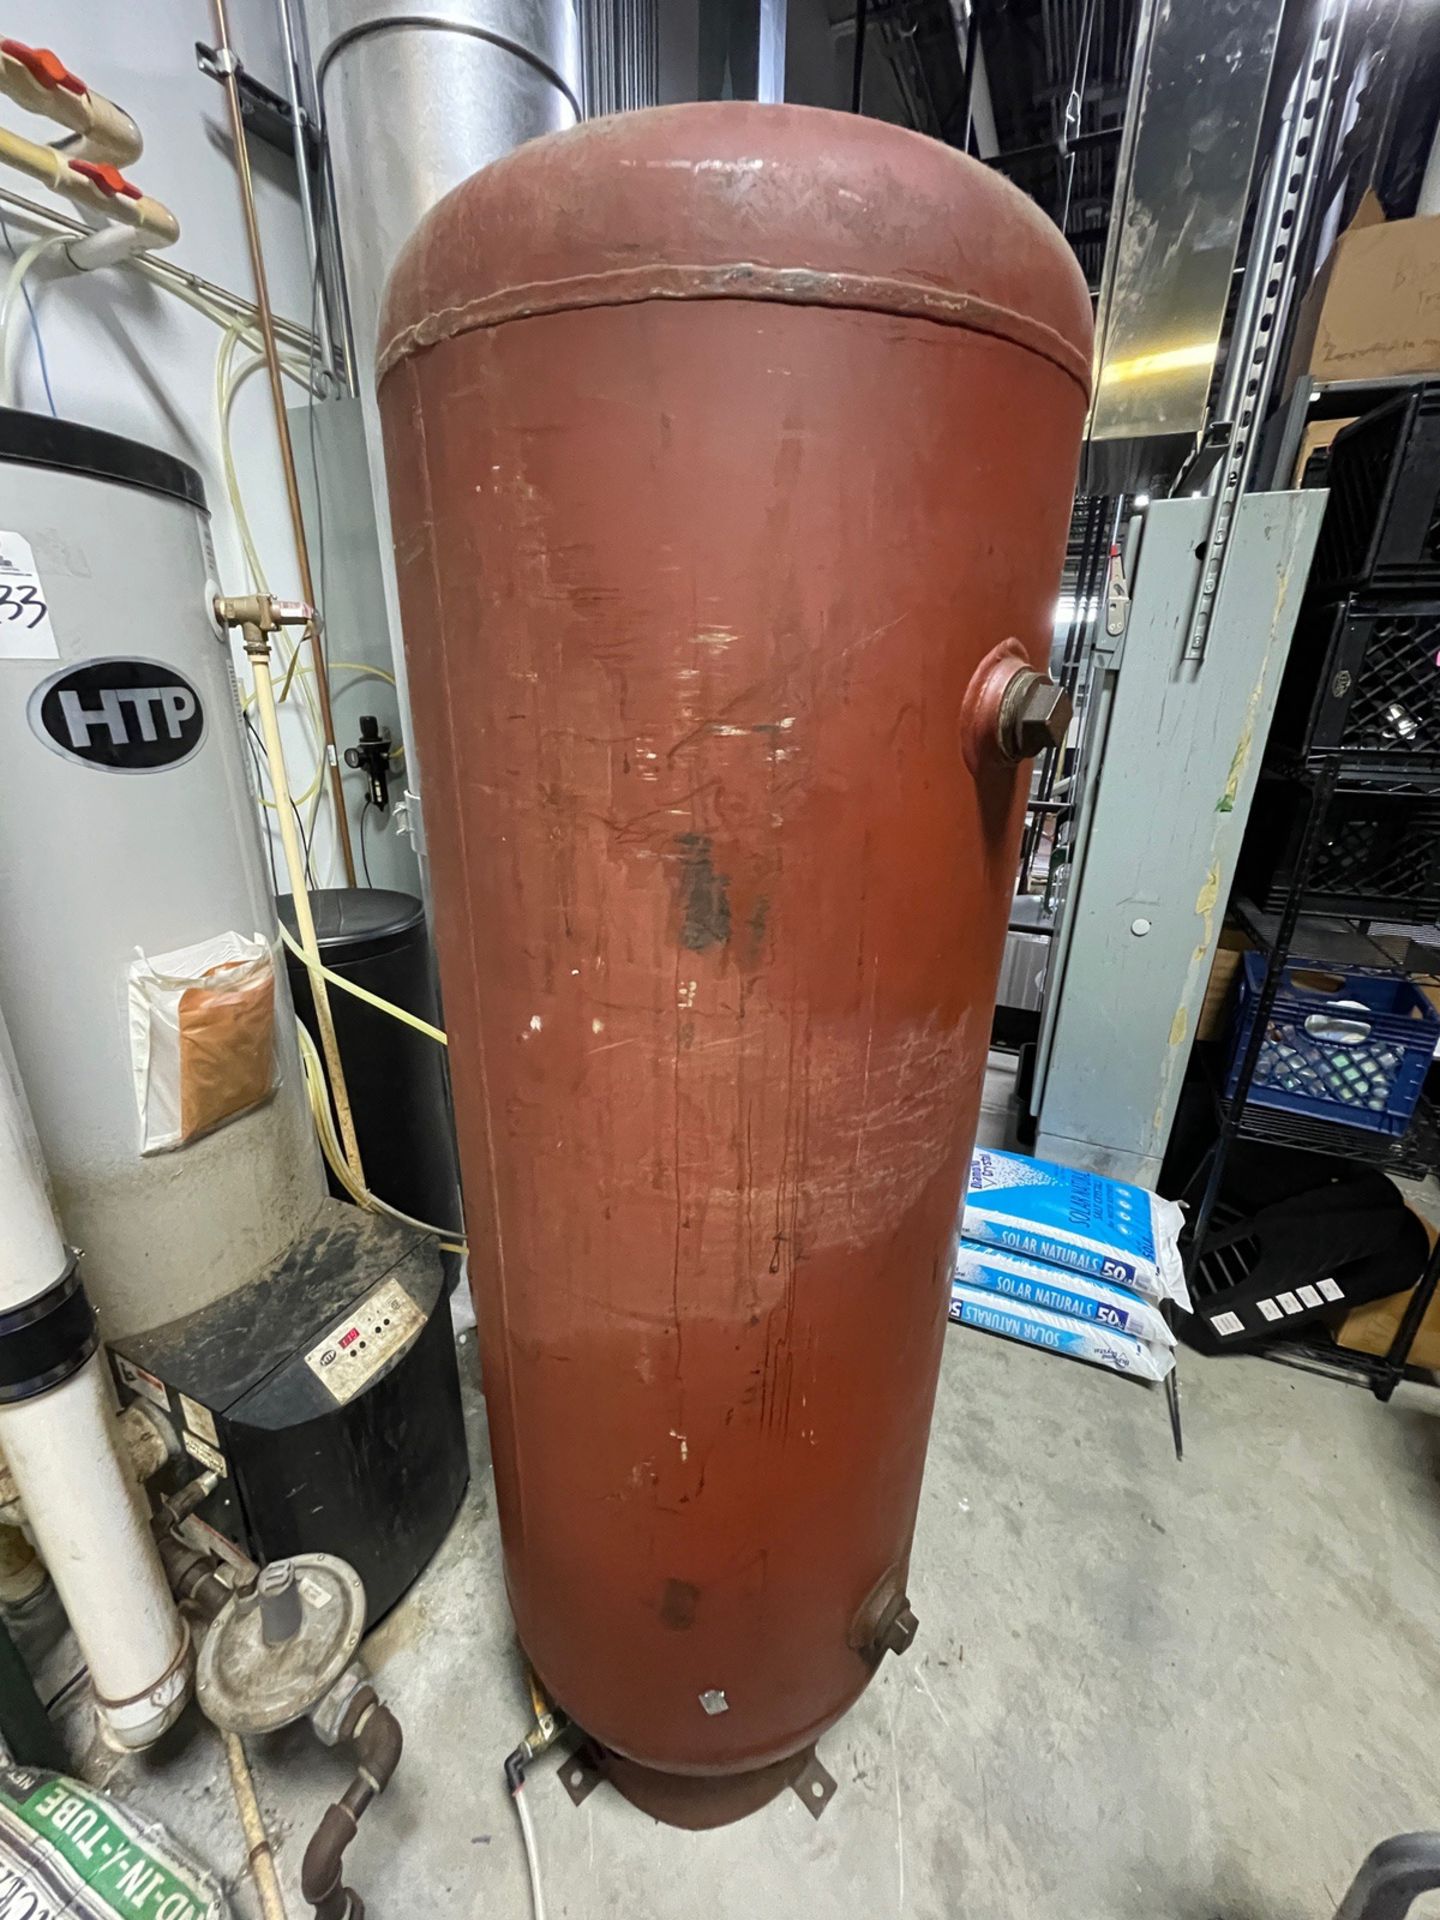 Boiler Blow Off Tank, Approx. 2' Diameter with 6'6" Height | Rig Fee $200 - Image 2 of 2